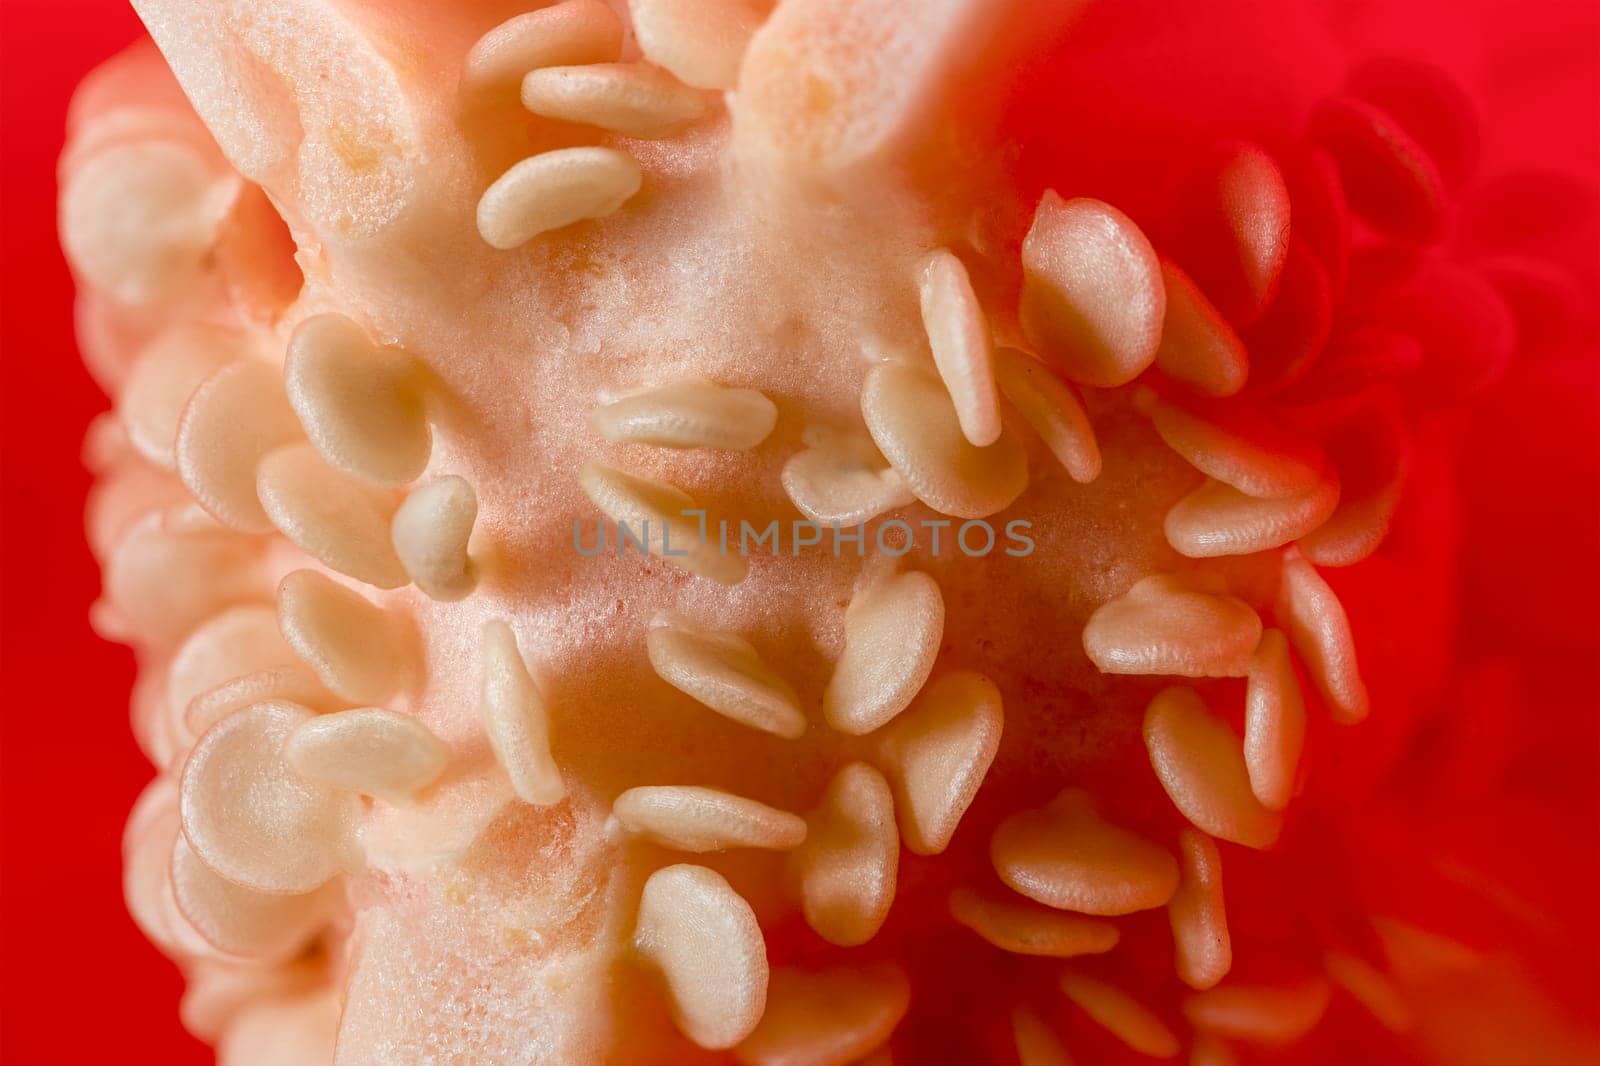 Paprika seeds close-up. A large fresh red paprika is cut in half and its seeds are visible. Side view. High quality photo